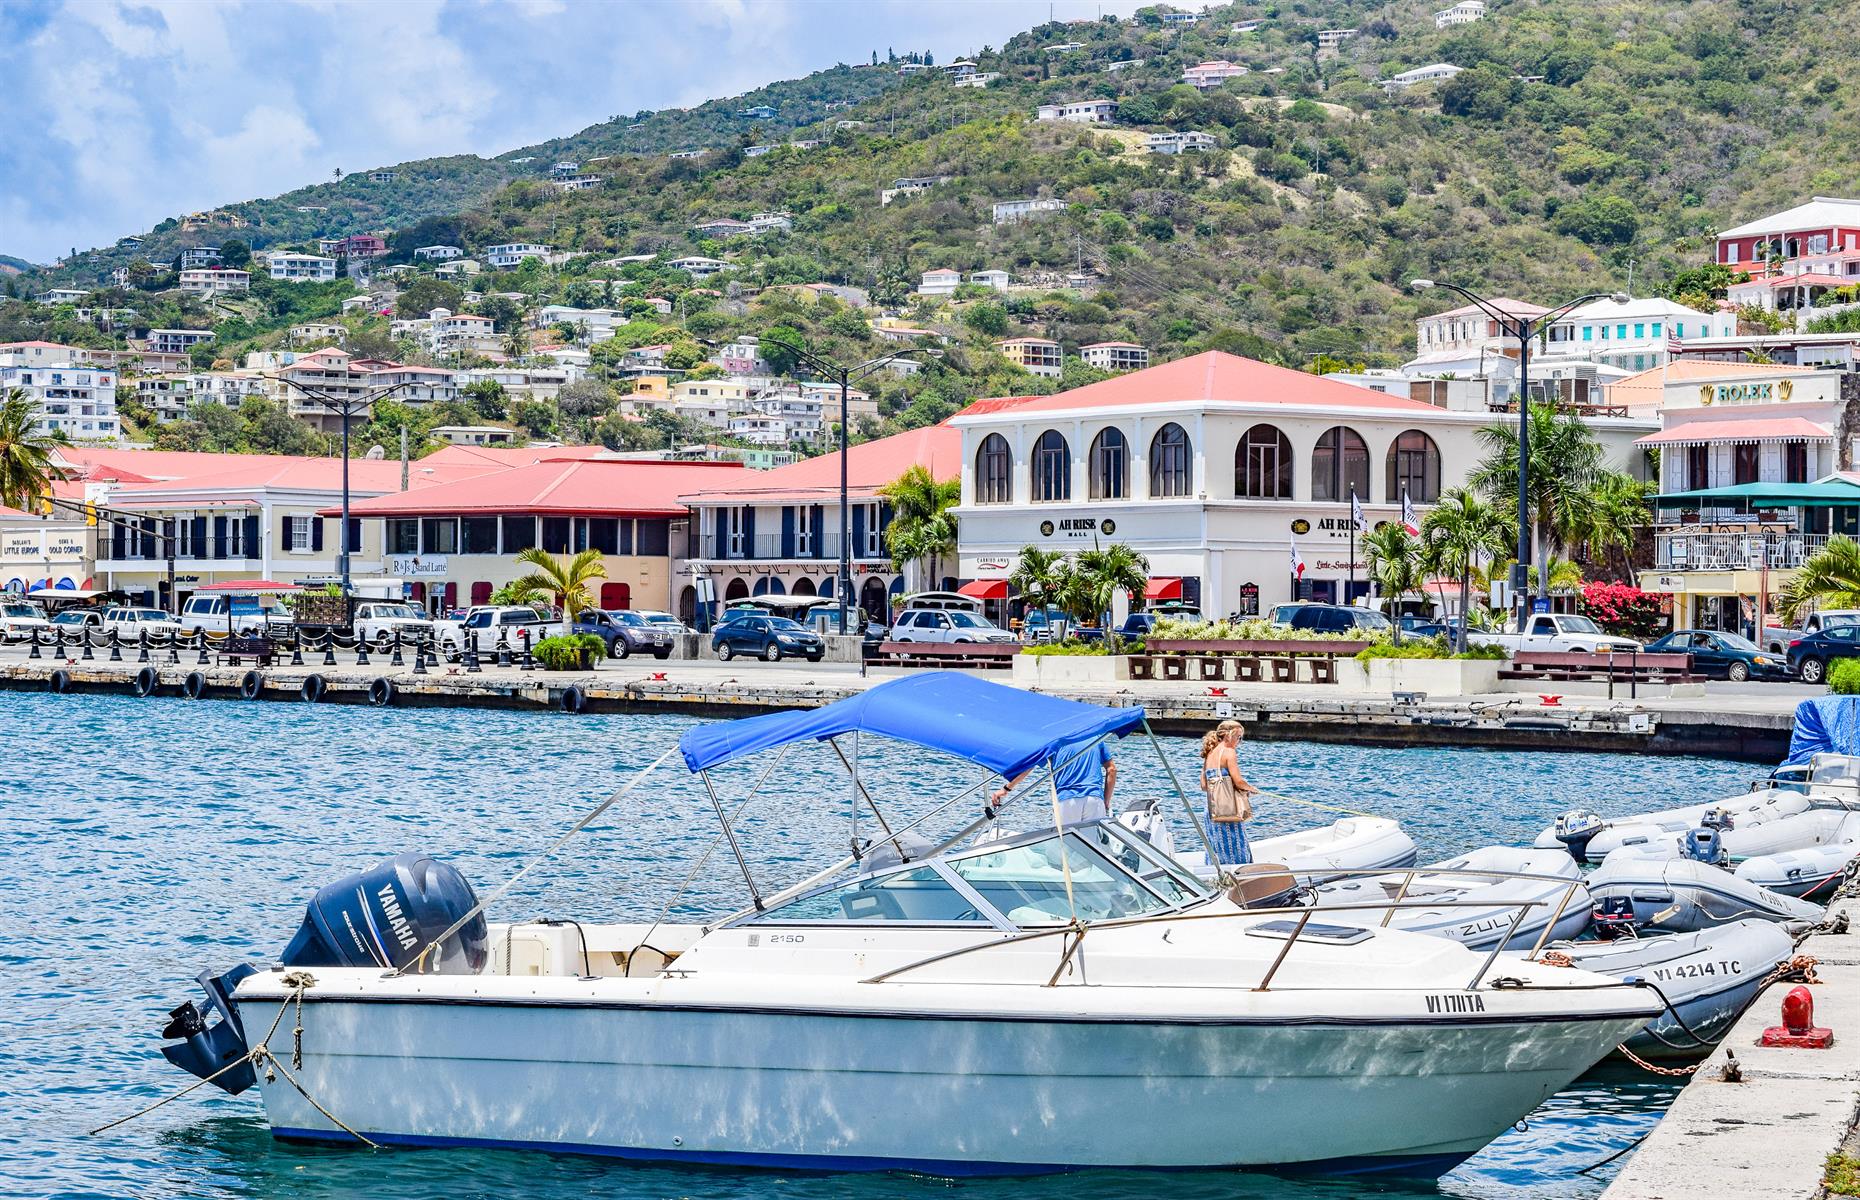 <p>The US Virgin Islands storm into fourth place in the most recent rankings, with an index score of 102.6. Like the Bahamas, the group of Caribbean islands has to import the majority of its goods, meaning a trip to the grocery store won't come cheap.</p>  <p>Restaurant prices are similarly sky-high, with a mid-range meal for two coming in at almost $130 (£103). Meanwhile, a cappuccino costs almost as much as a bottle of beer, at $5.85 (£4.60) and $6 (£4.75) respectively.</p>